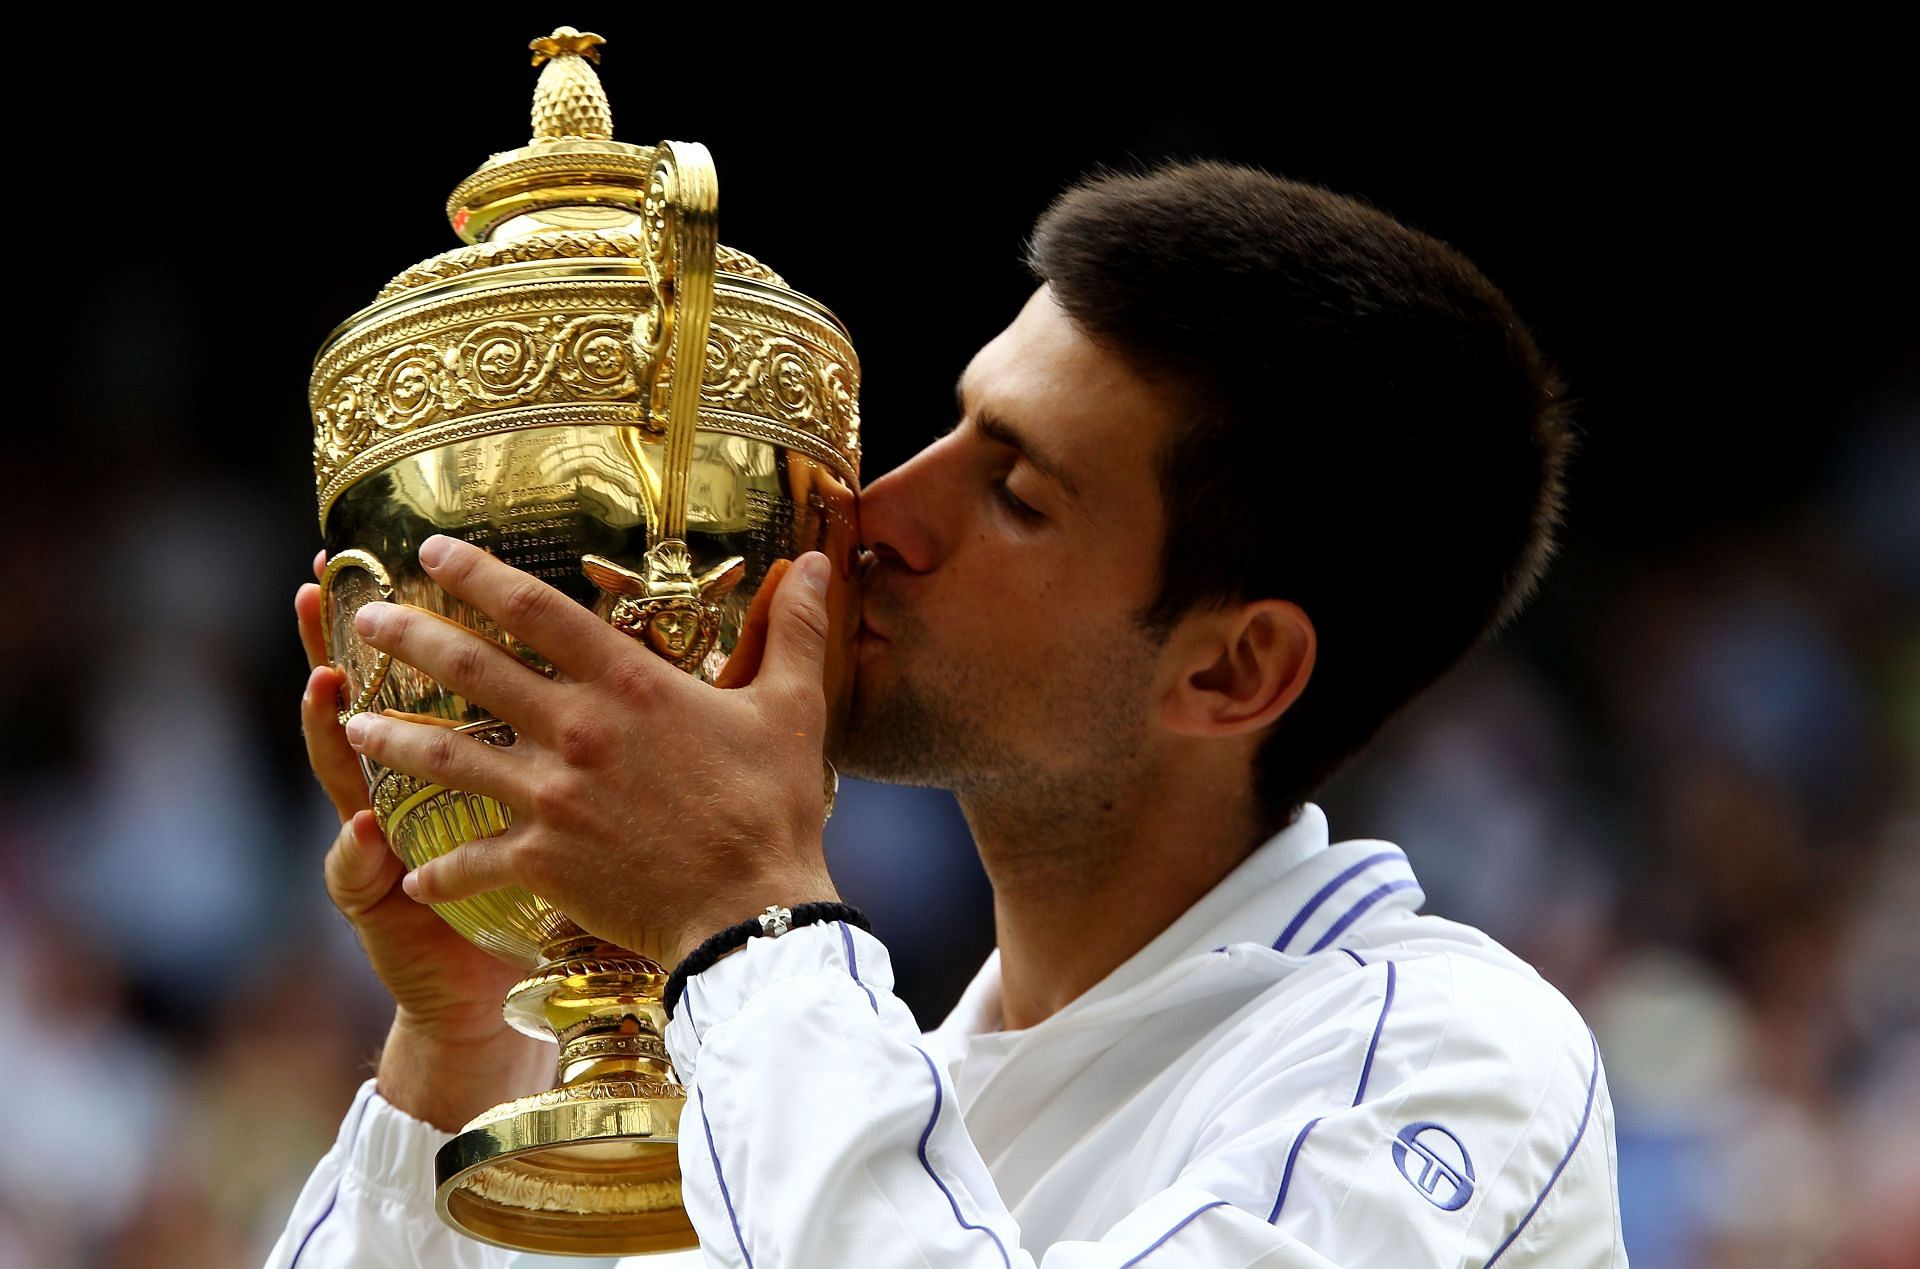 The Serb lifts the Wimbledon trophy in 2011